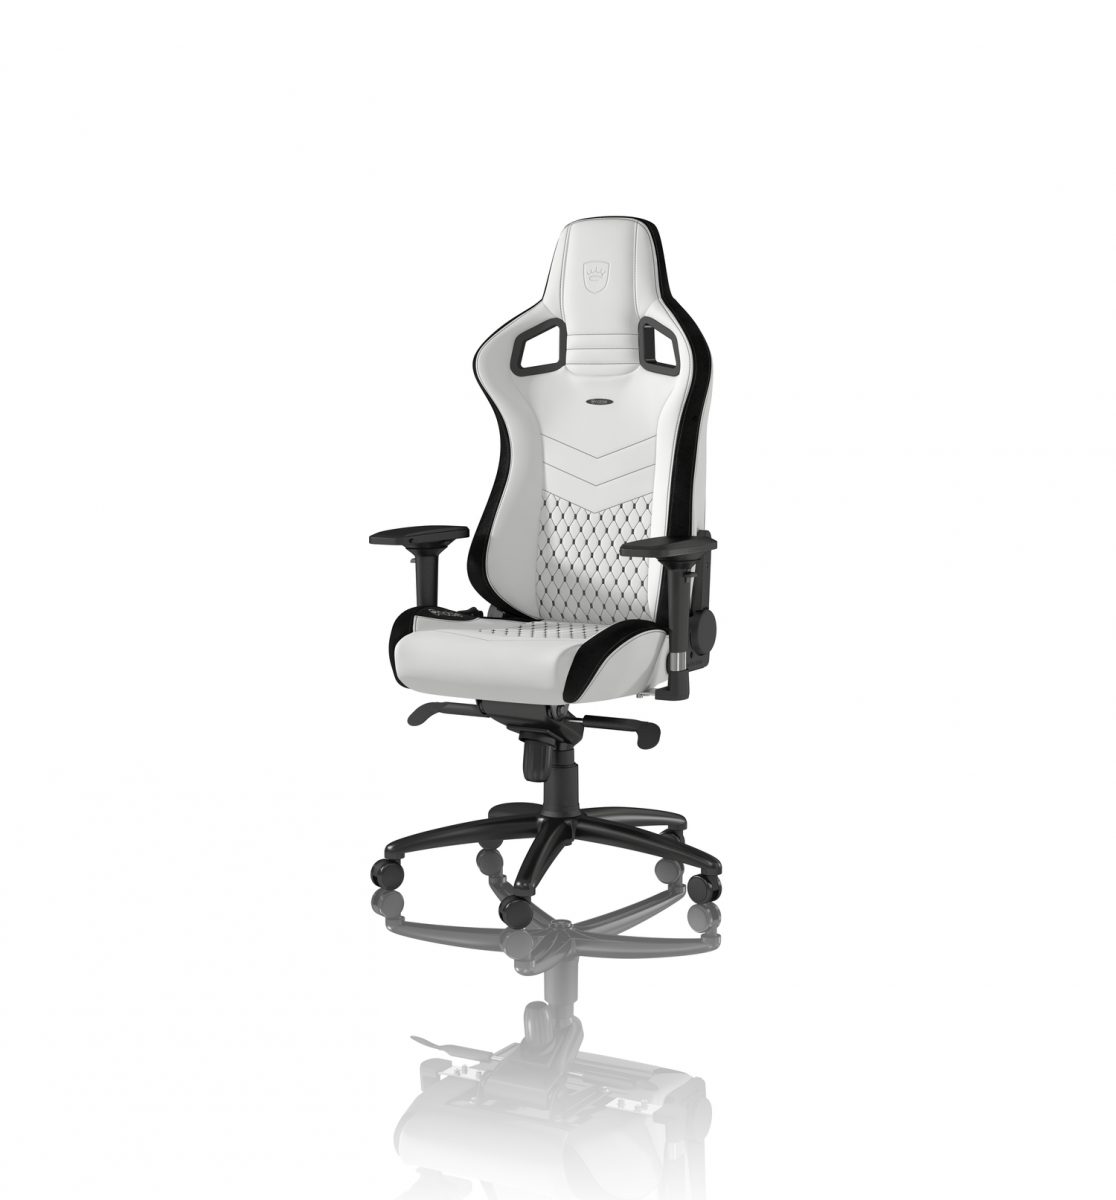 noblechairs EPIC Gaming Chair Breathable, 4D armrests, 60mm casters - black/white - CASEKING 2.35.63.01.004